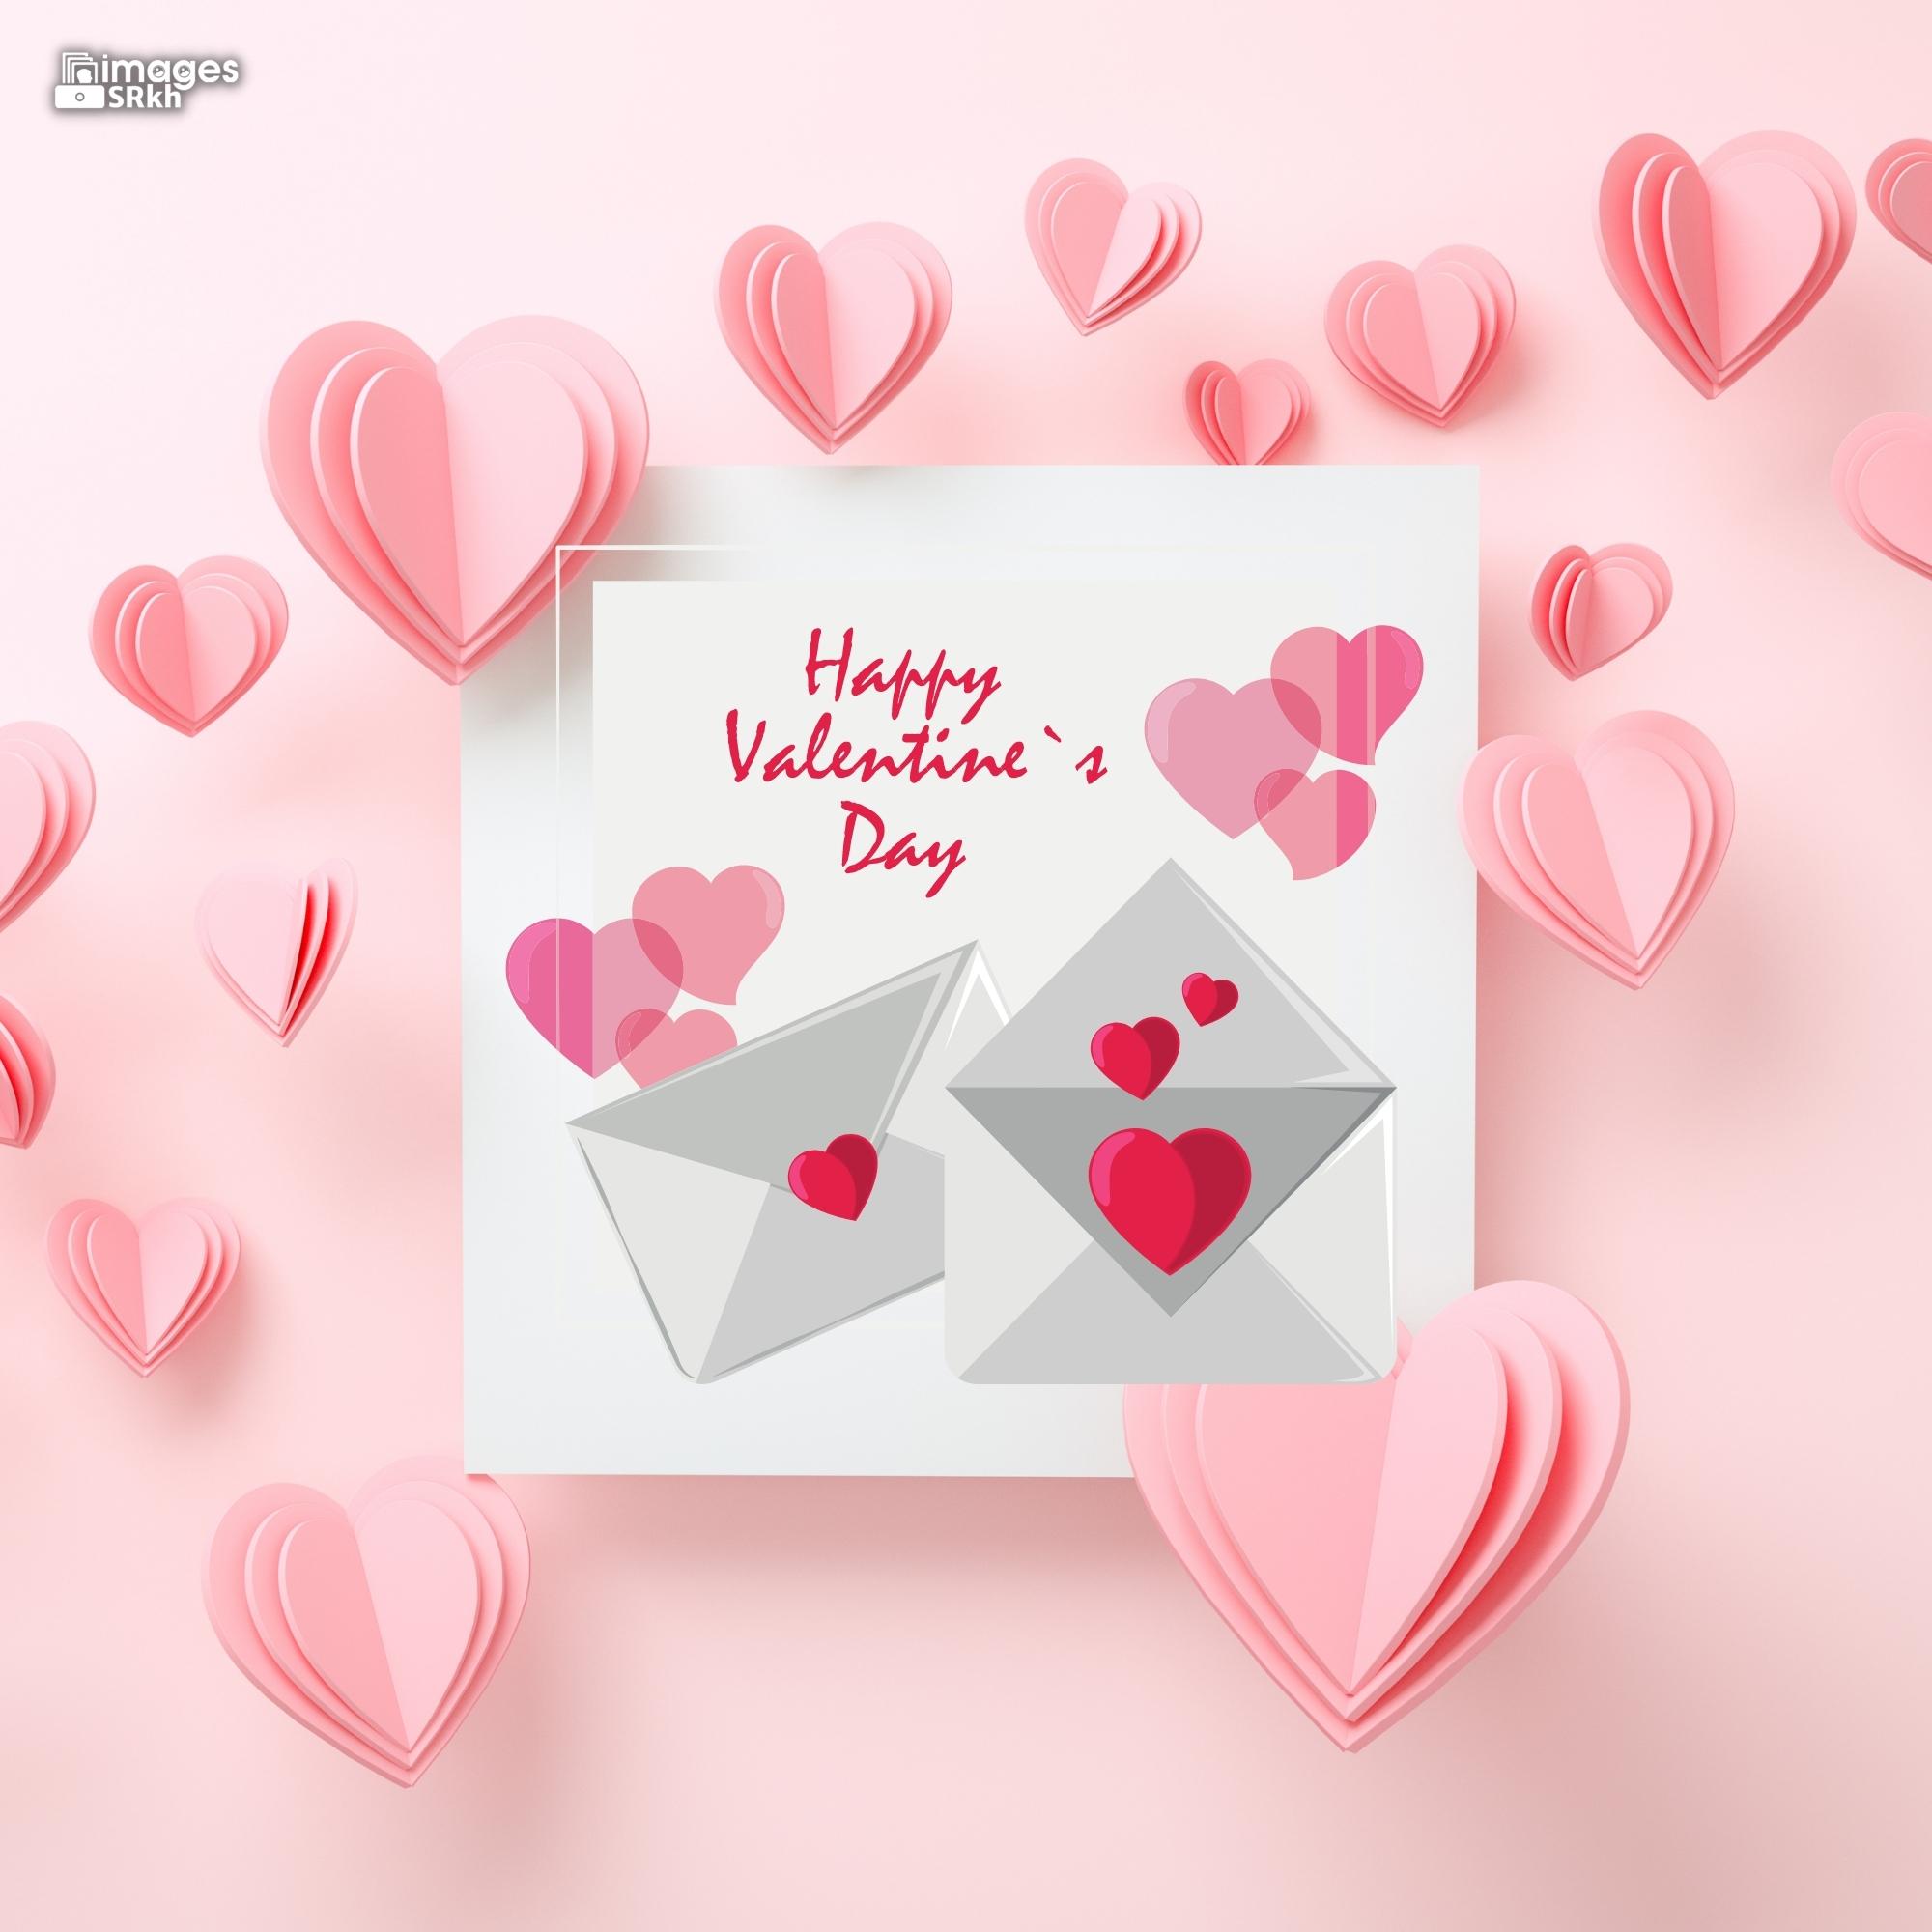 Happy Valentines Day | 492 | PREMIUM IMAGES | Wishes for Love